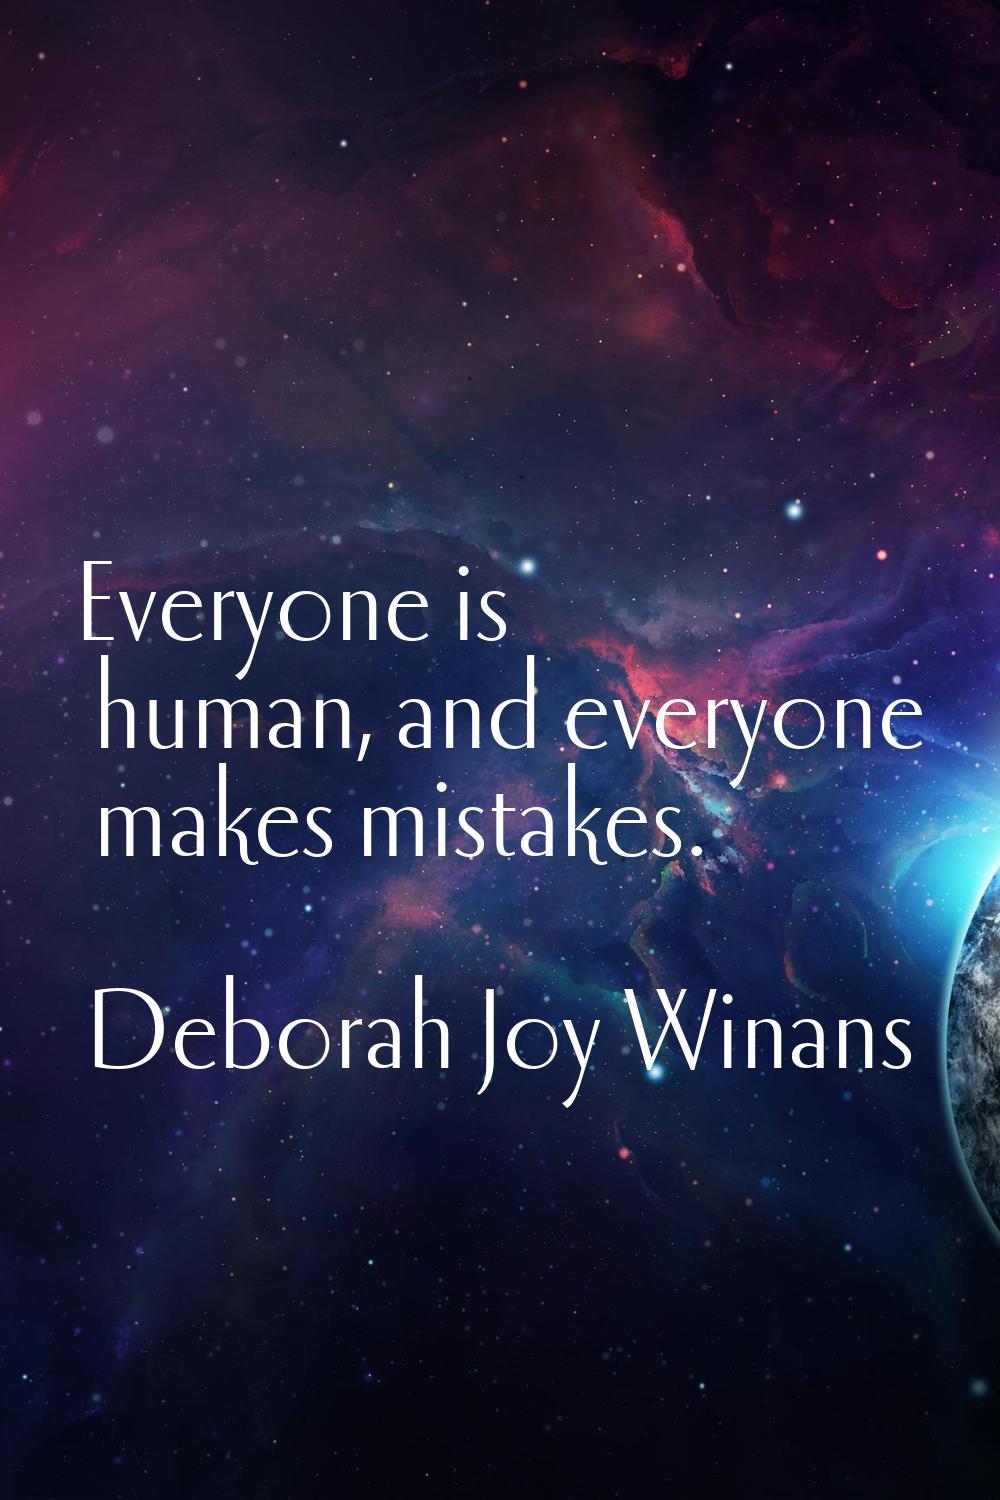 Everyone is human, and everyone makes mistakes.